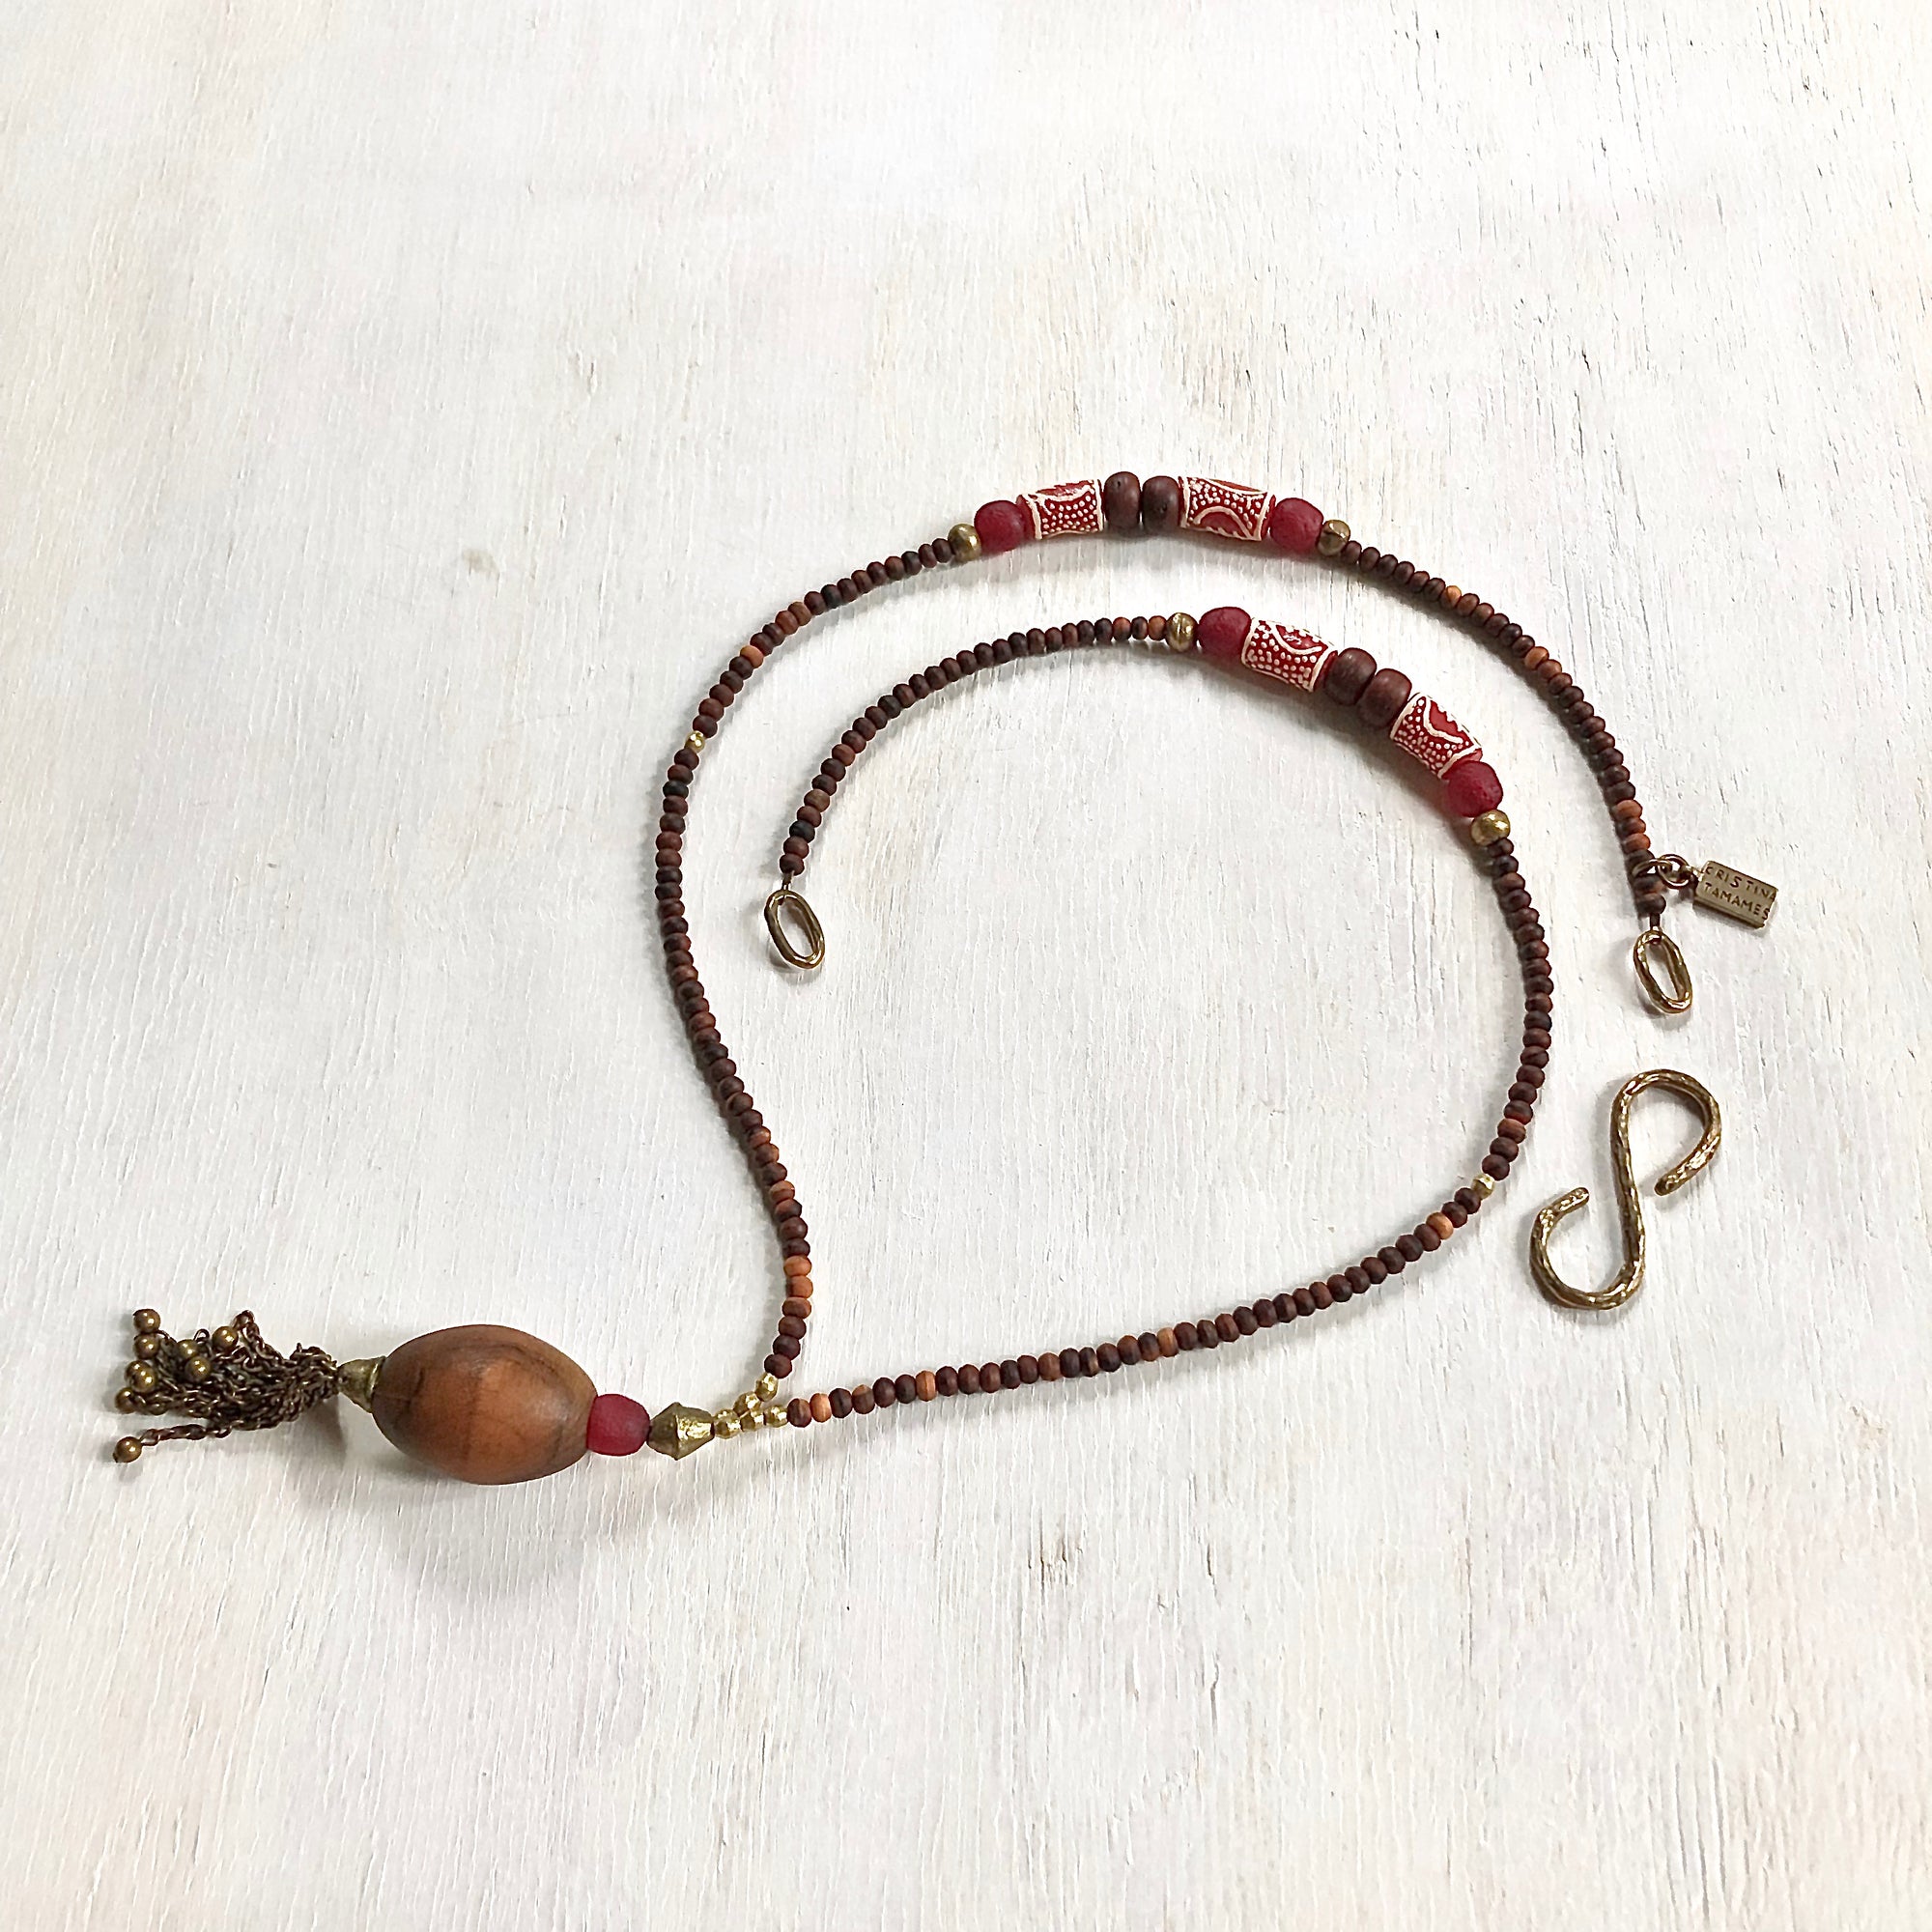 Hand painted red Adinkra African beads with vintage olive wood pendant long necklace. Cristina Tamames Jewelry Designer